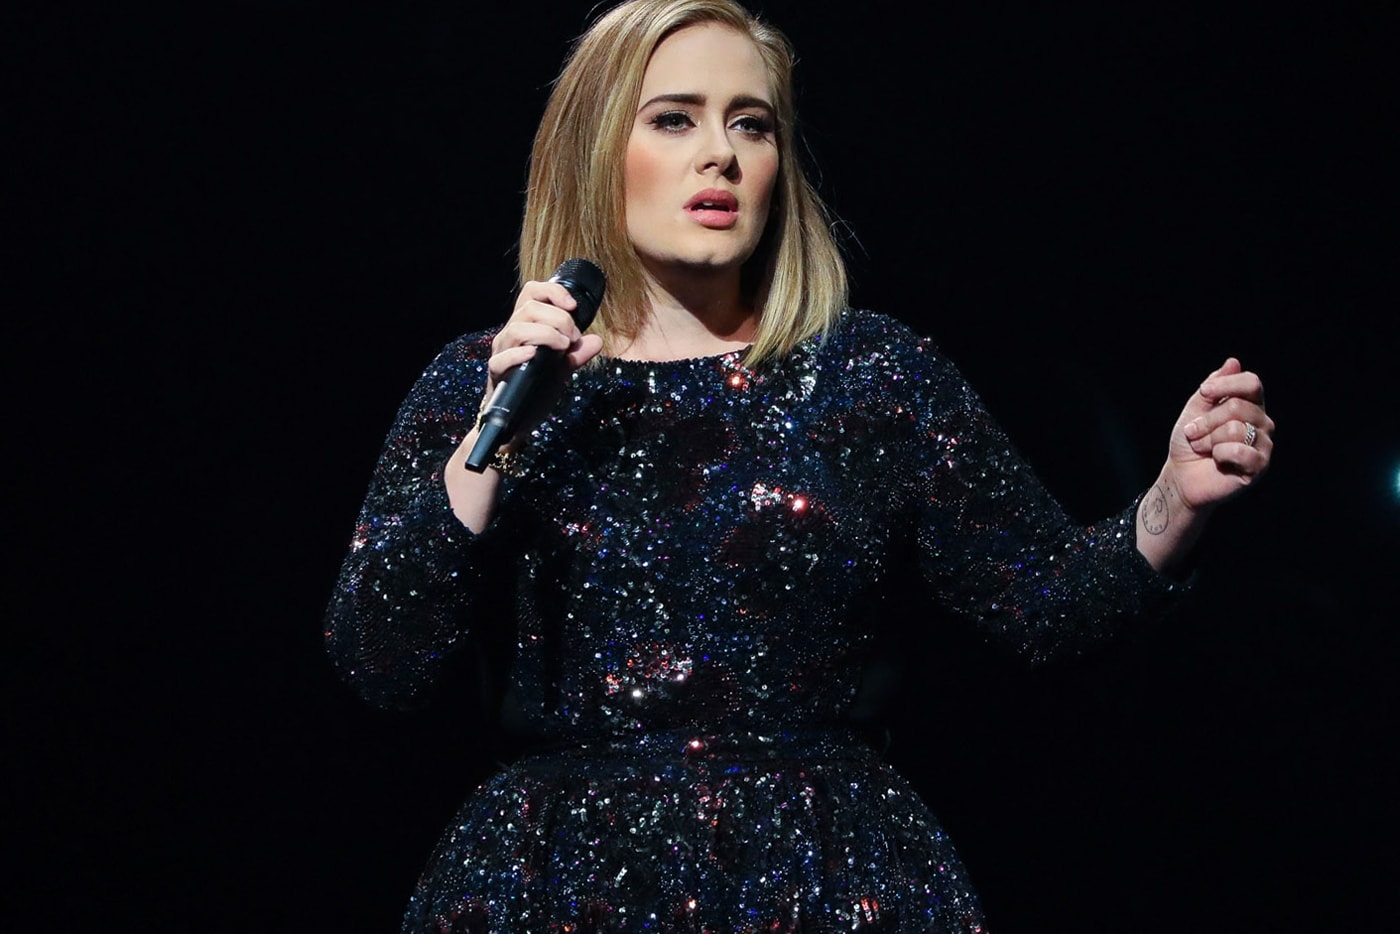 Adele Wins Song of the Year at 2017 GRAMMY Awards